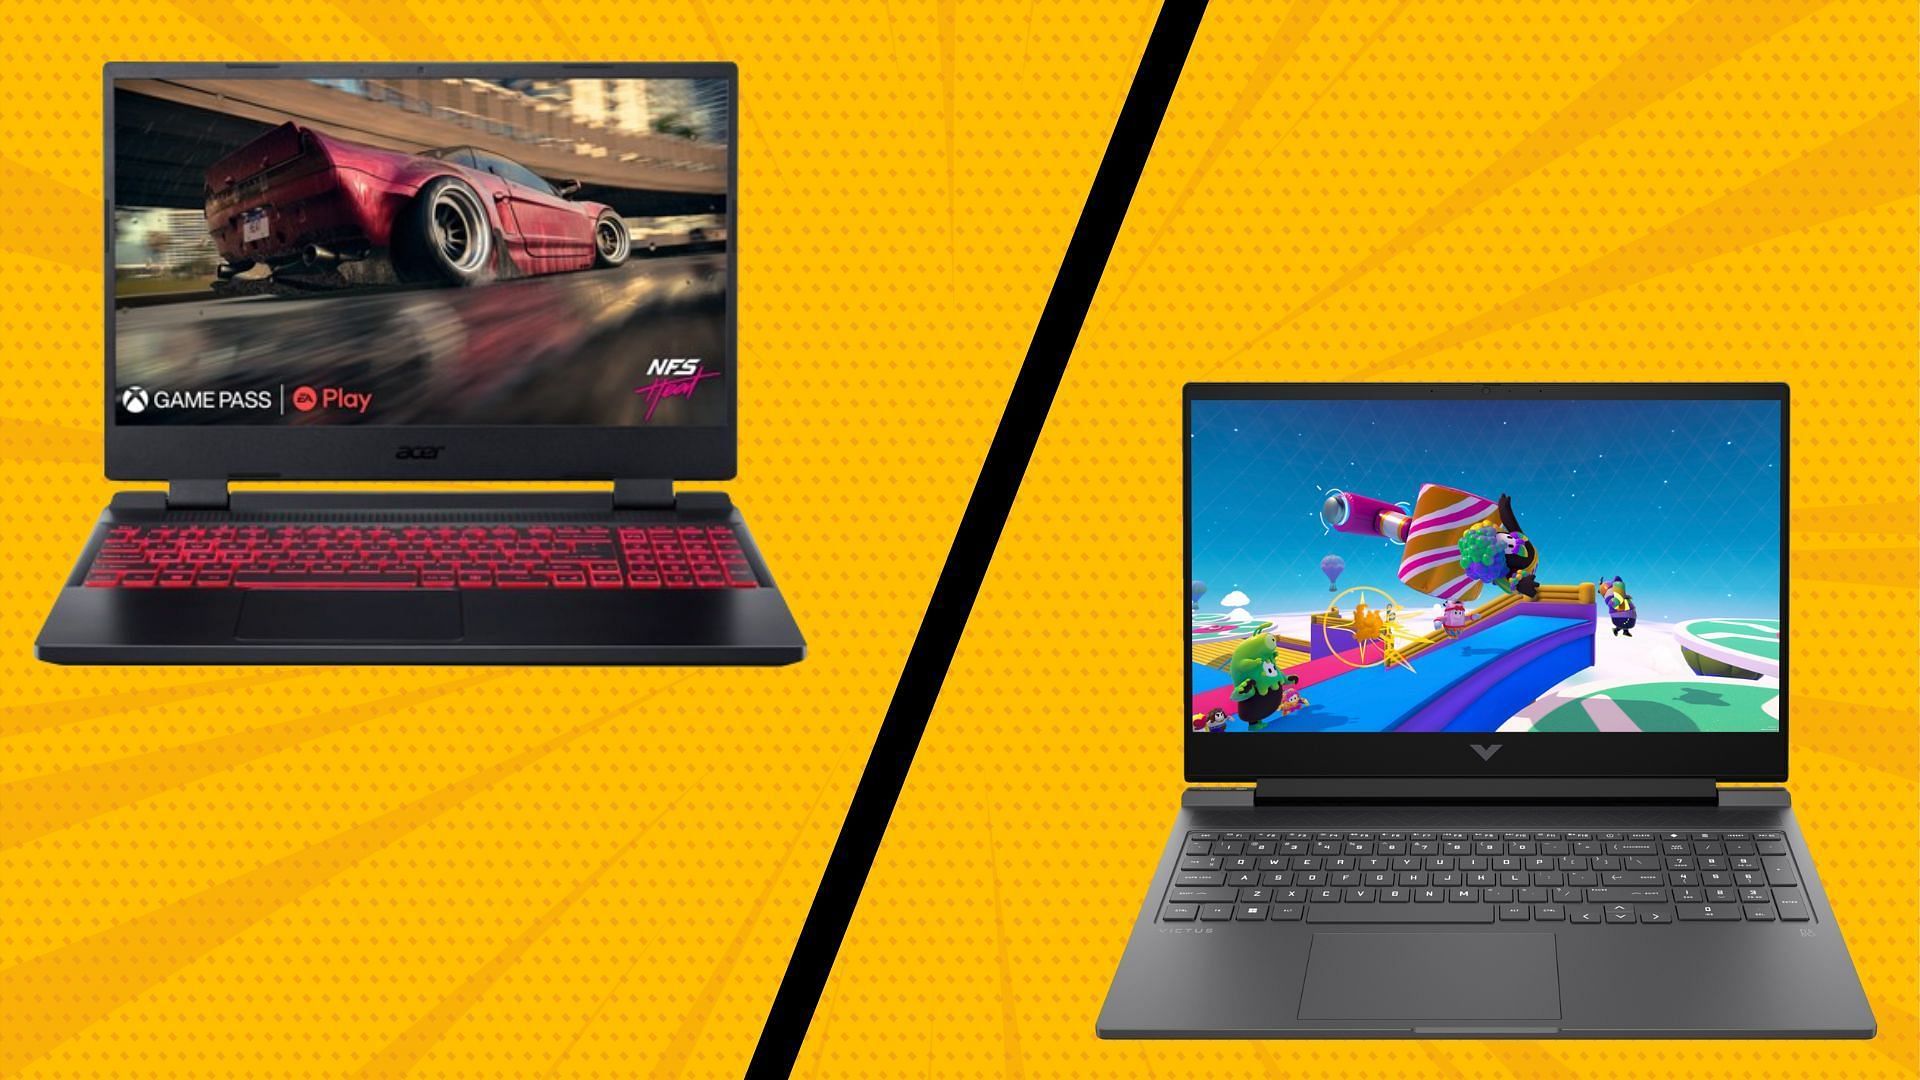 Acer Nitro 5 vs HP Victus: Which is the best mid-tier gaming laptop? (Image via Acer, HP)